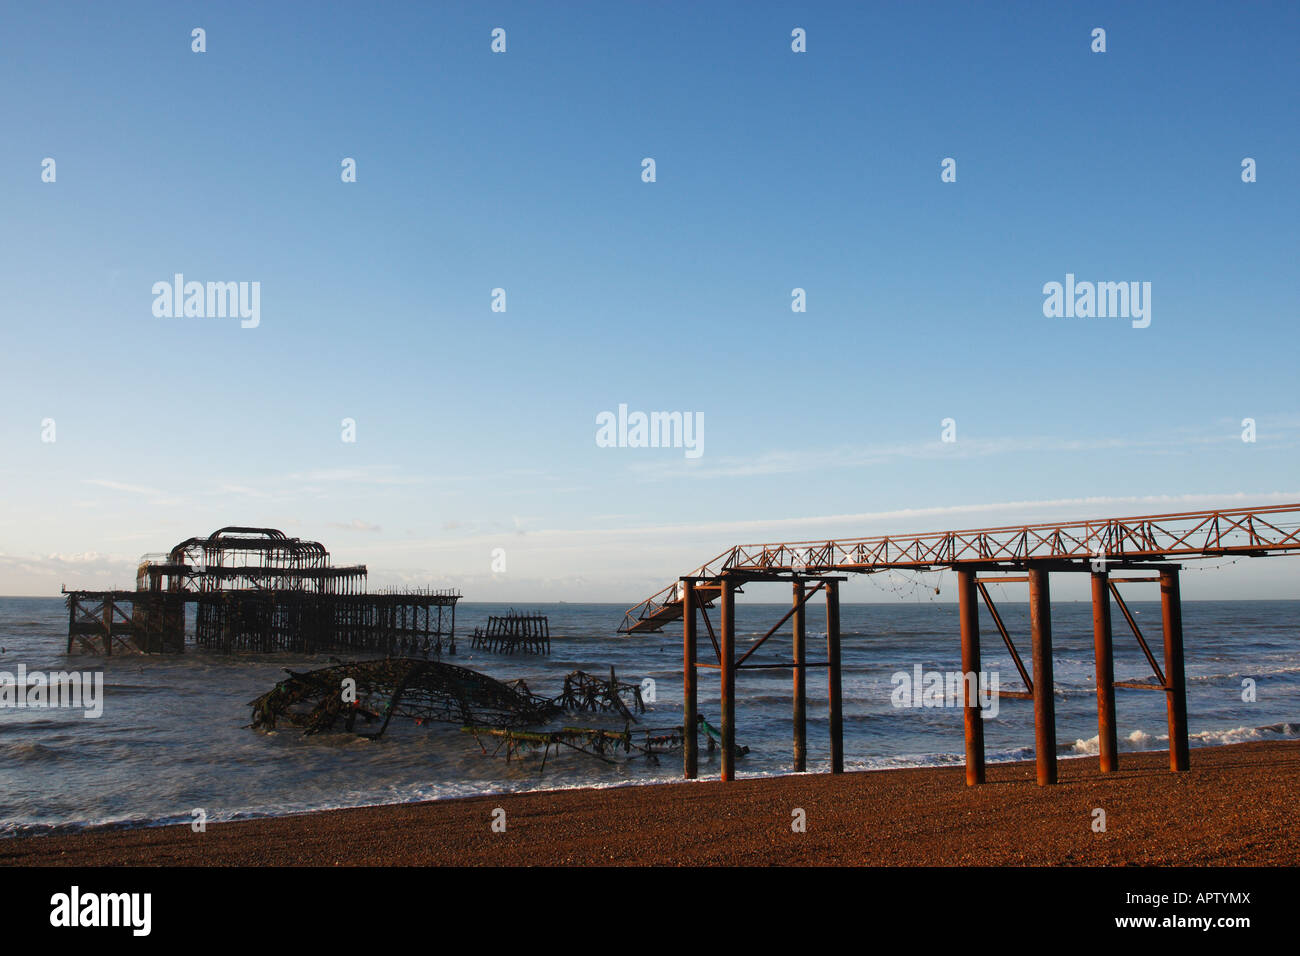 remains of the west pier brighton built in 1866 and burnt down in 2003 taken in the early morning sussex england uk Stock Photo